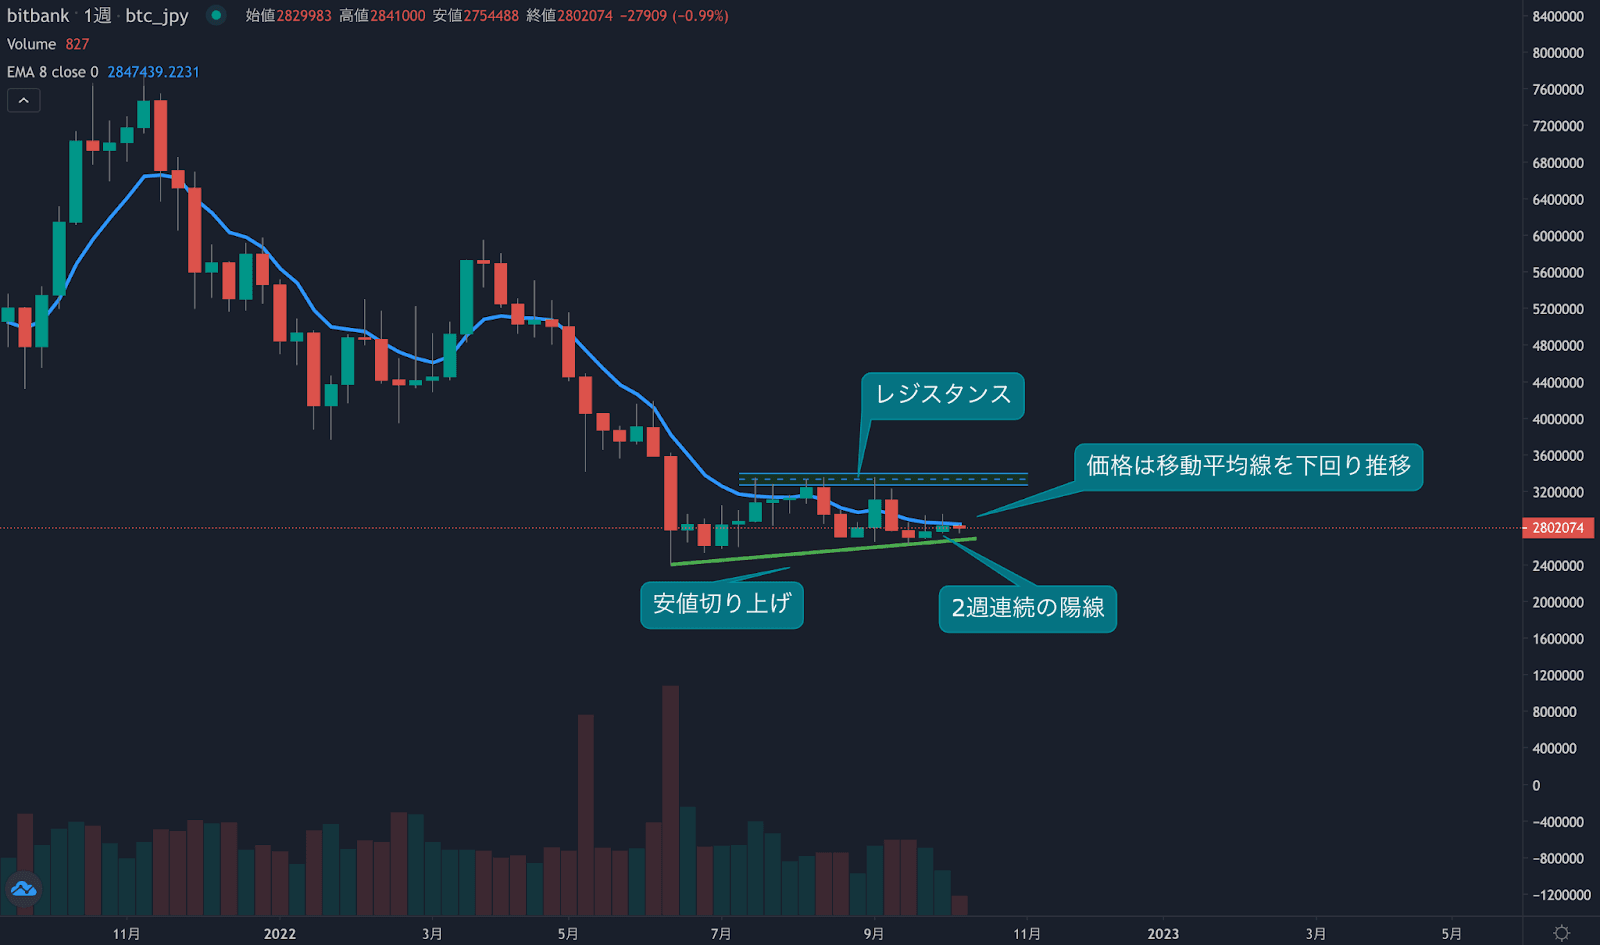 https://images.microcms-assets.io/assets/5c7d01000562418eb10a884ae8573fa3/f27c89502f5d4ddfaf1839b4cec6f8df/weekly-technical-analysis20221013-1.png